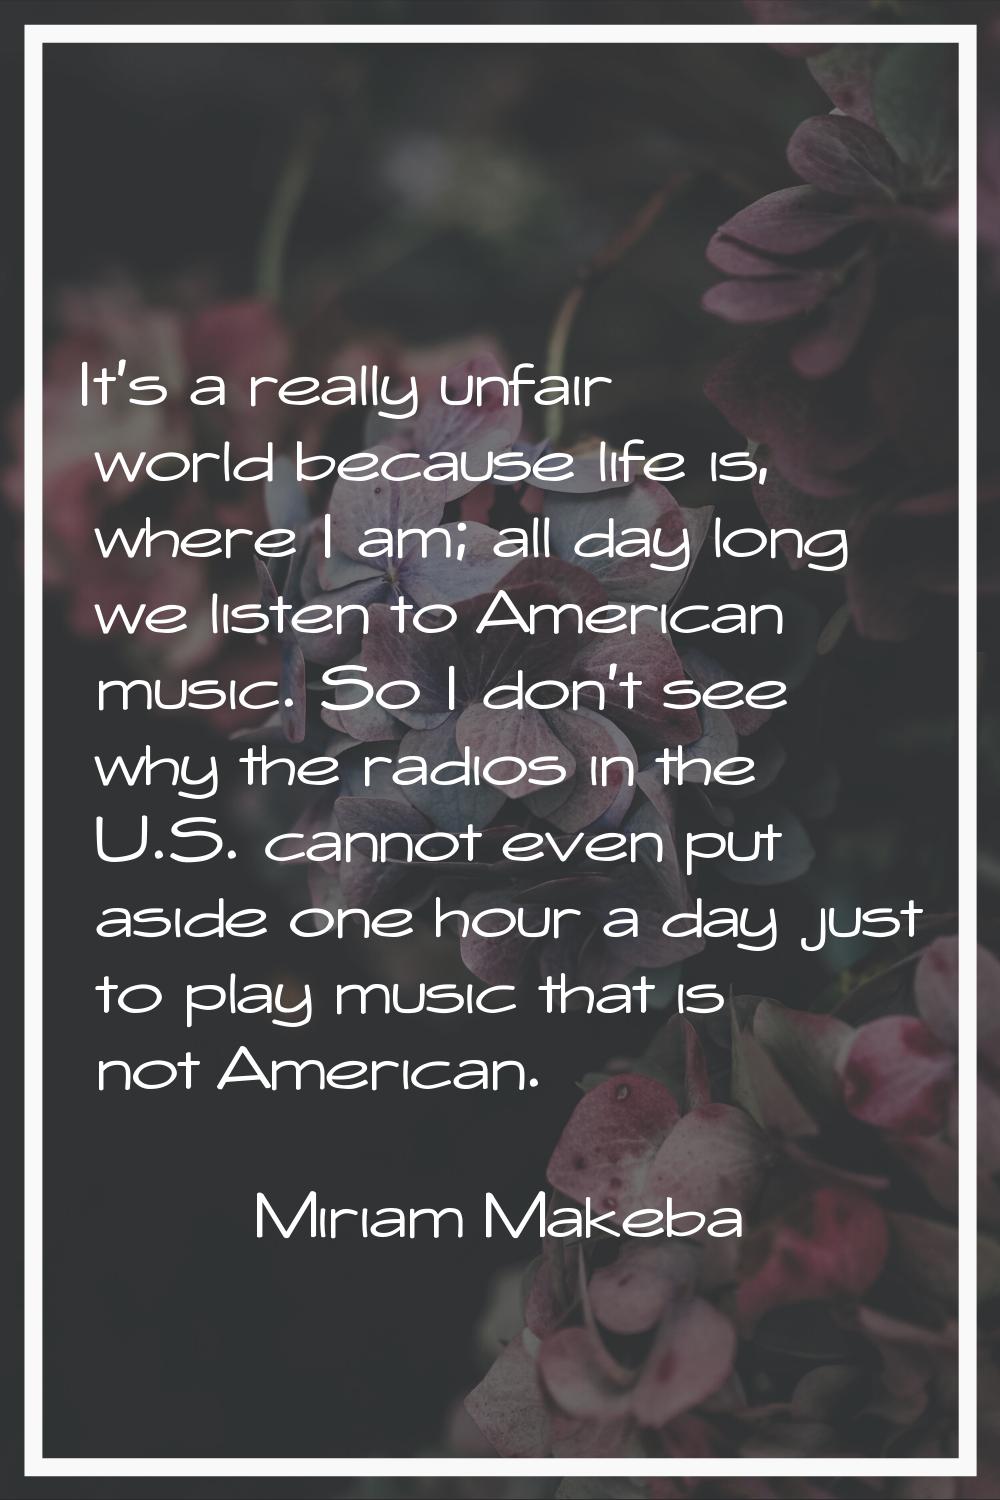 It's a really unfair world because life is, where I am; all day long we listen to American music. S